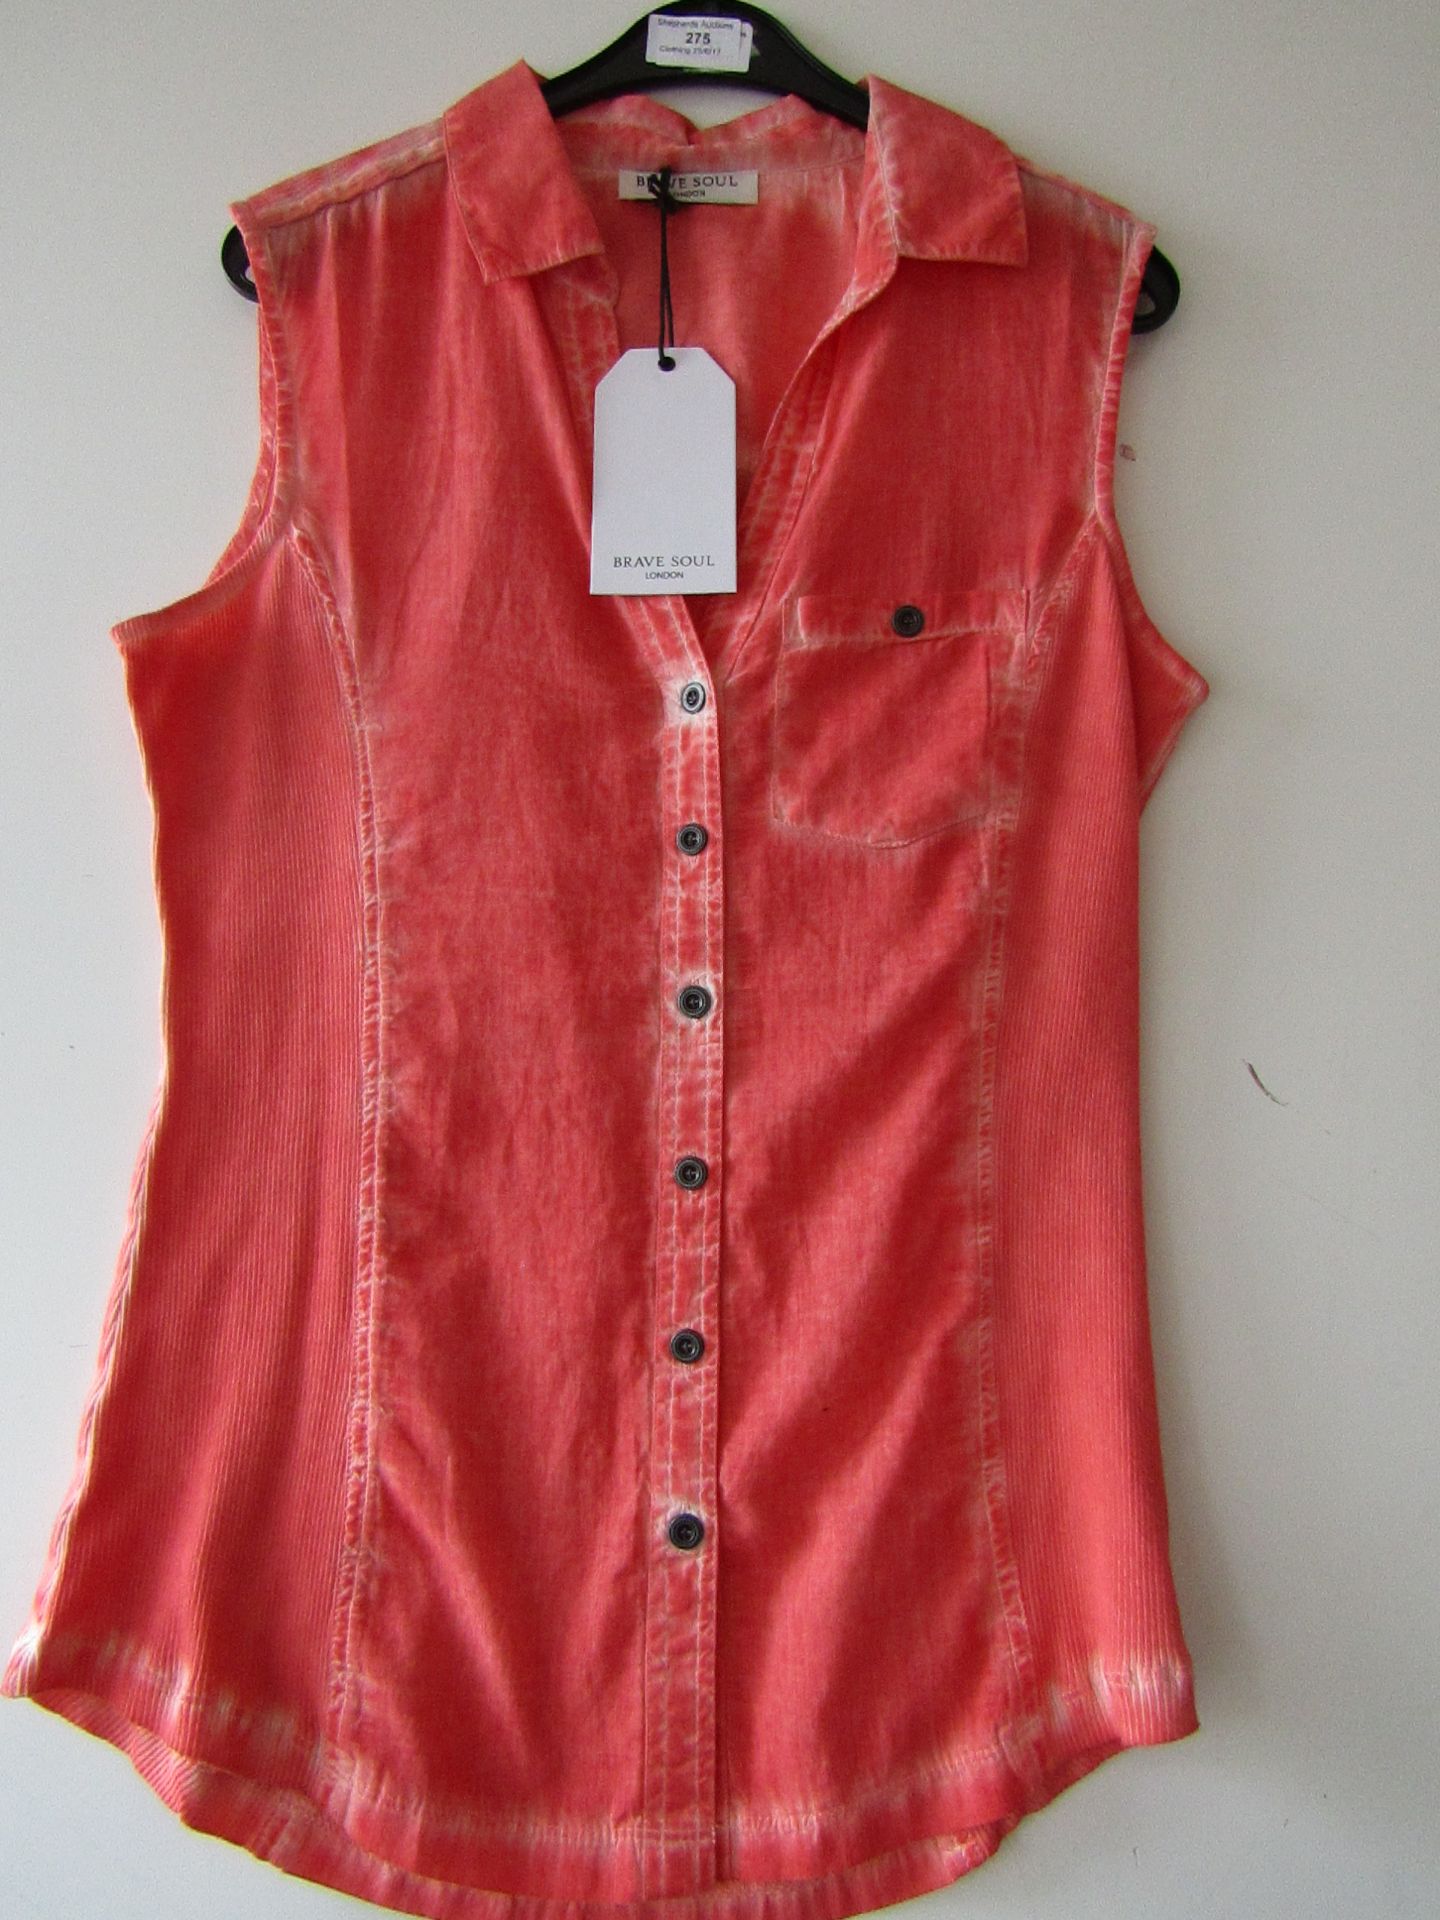 Ladies Brave Soul Distressed Sleeveless Shirt. New Sample with tags. Size S